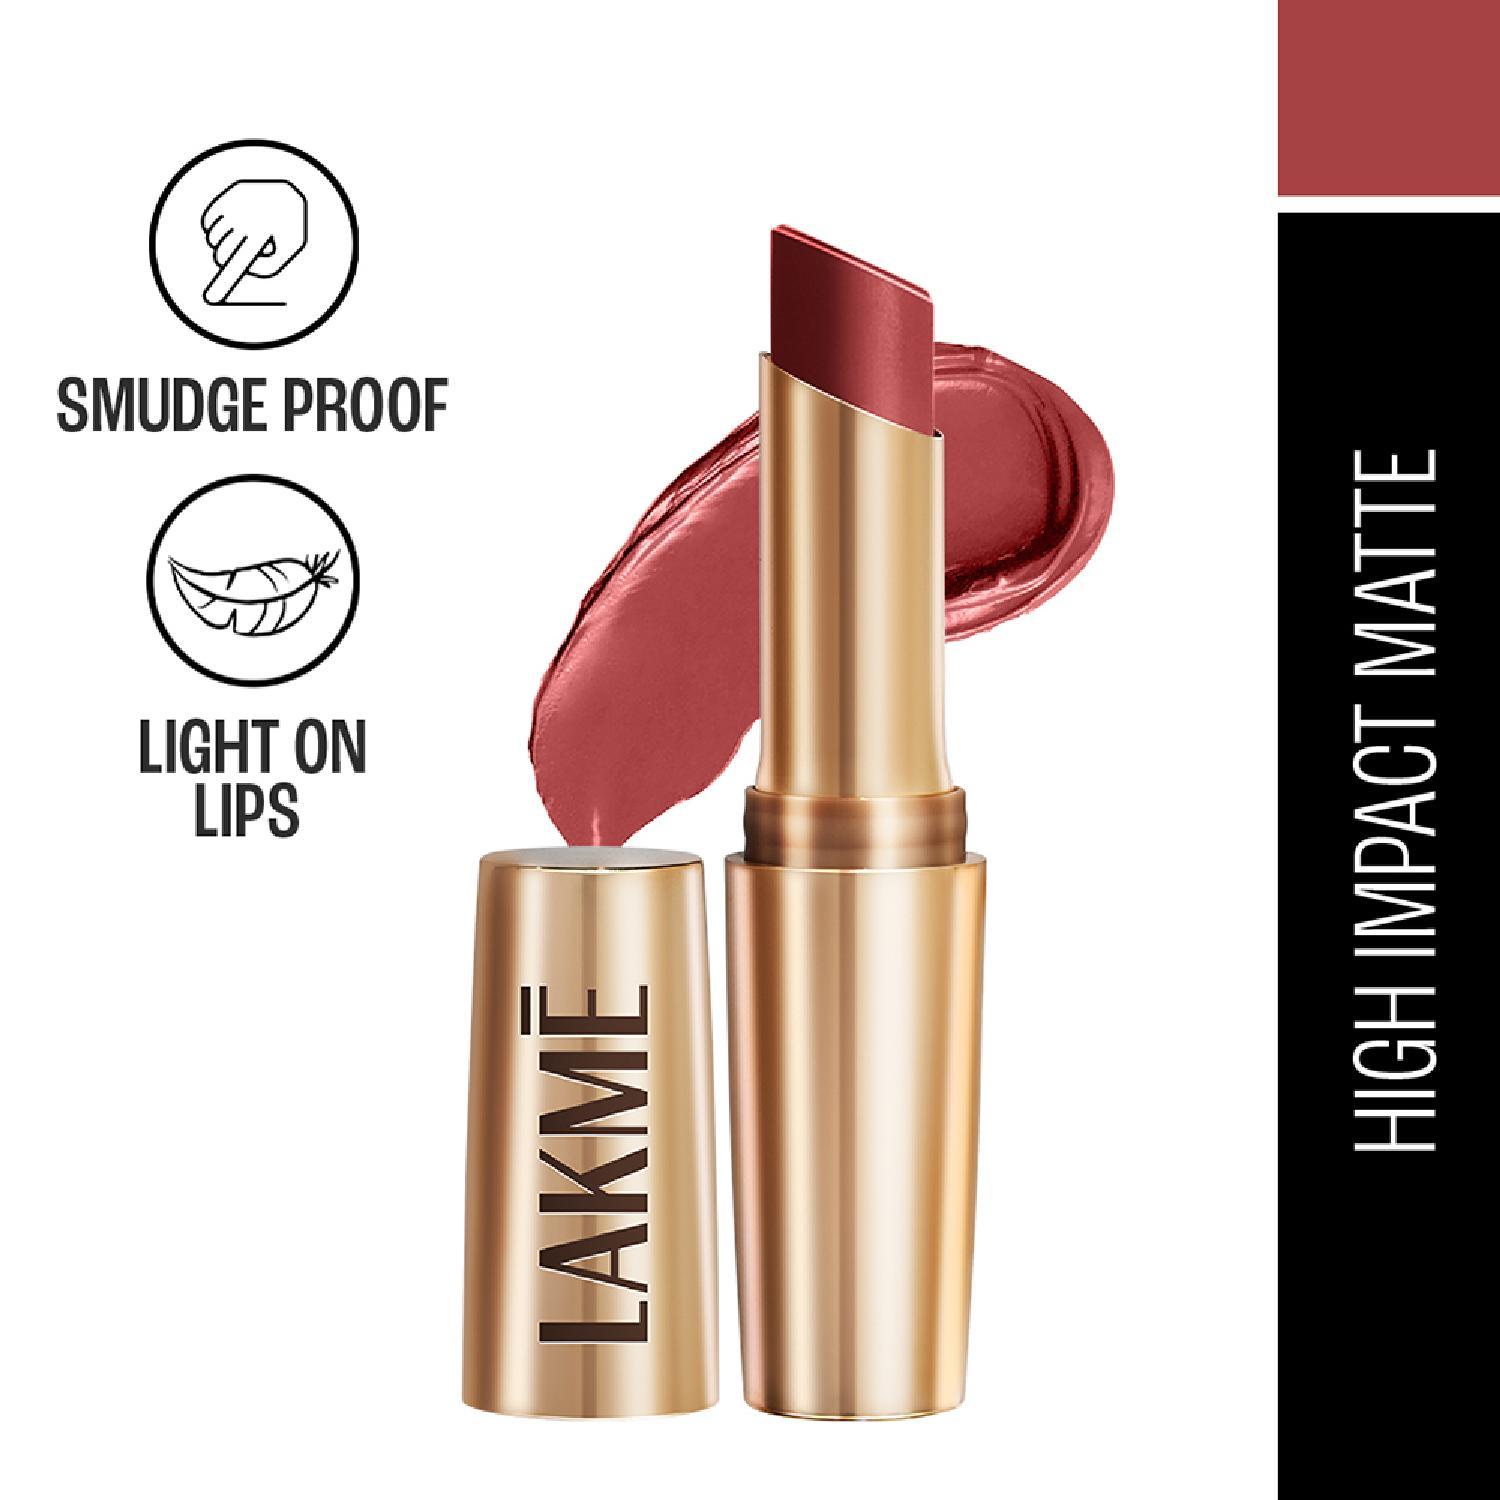 Lakme 9 to 5 Powerplay Priming Matte Lipstick, Lasts 16hrs, Roseatte Red (3.6g)